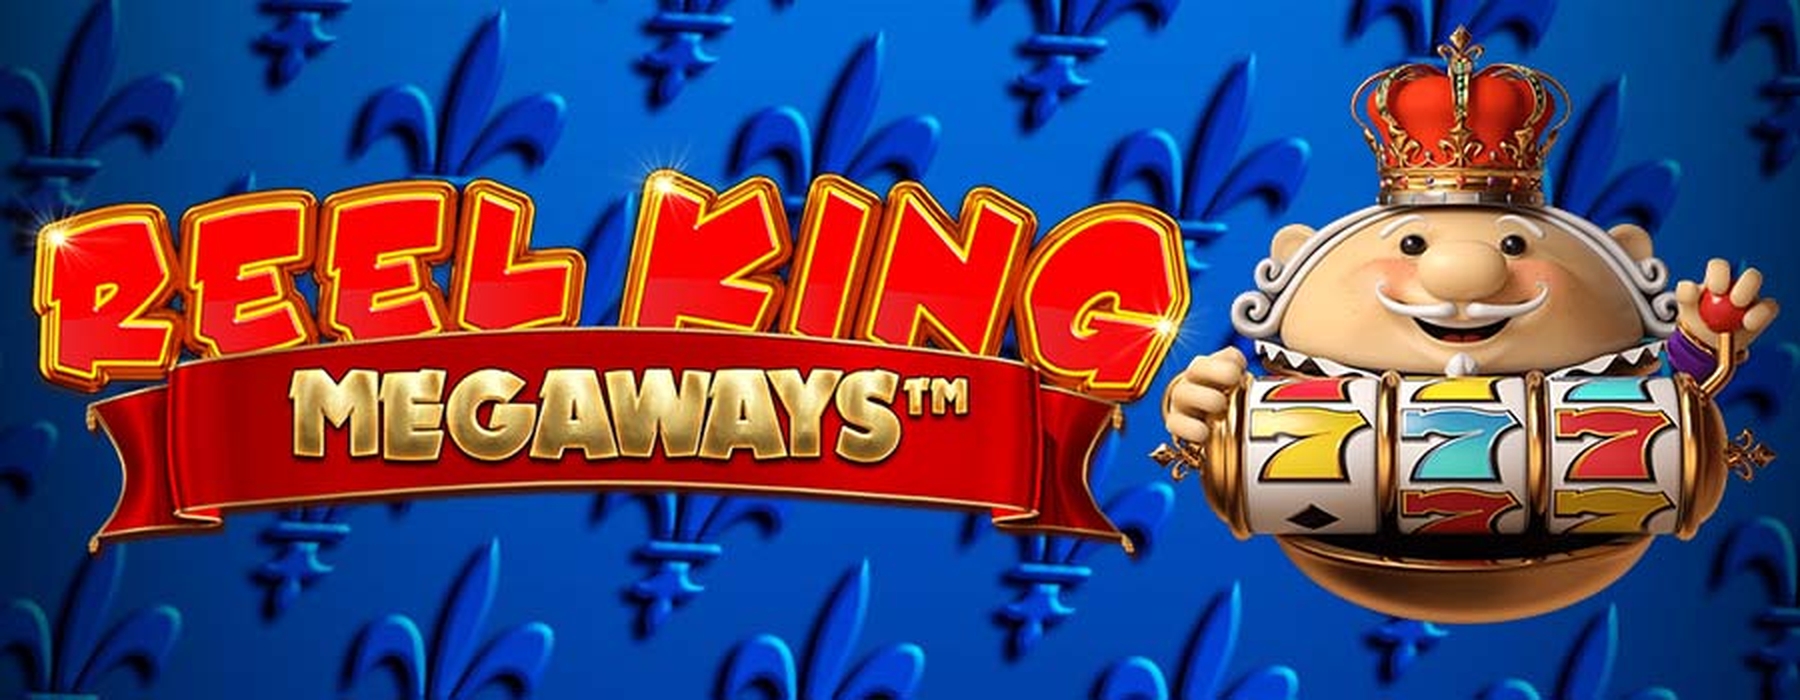 The Reel King Megaways Online Slot Demo Game by Inspired Gaming